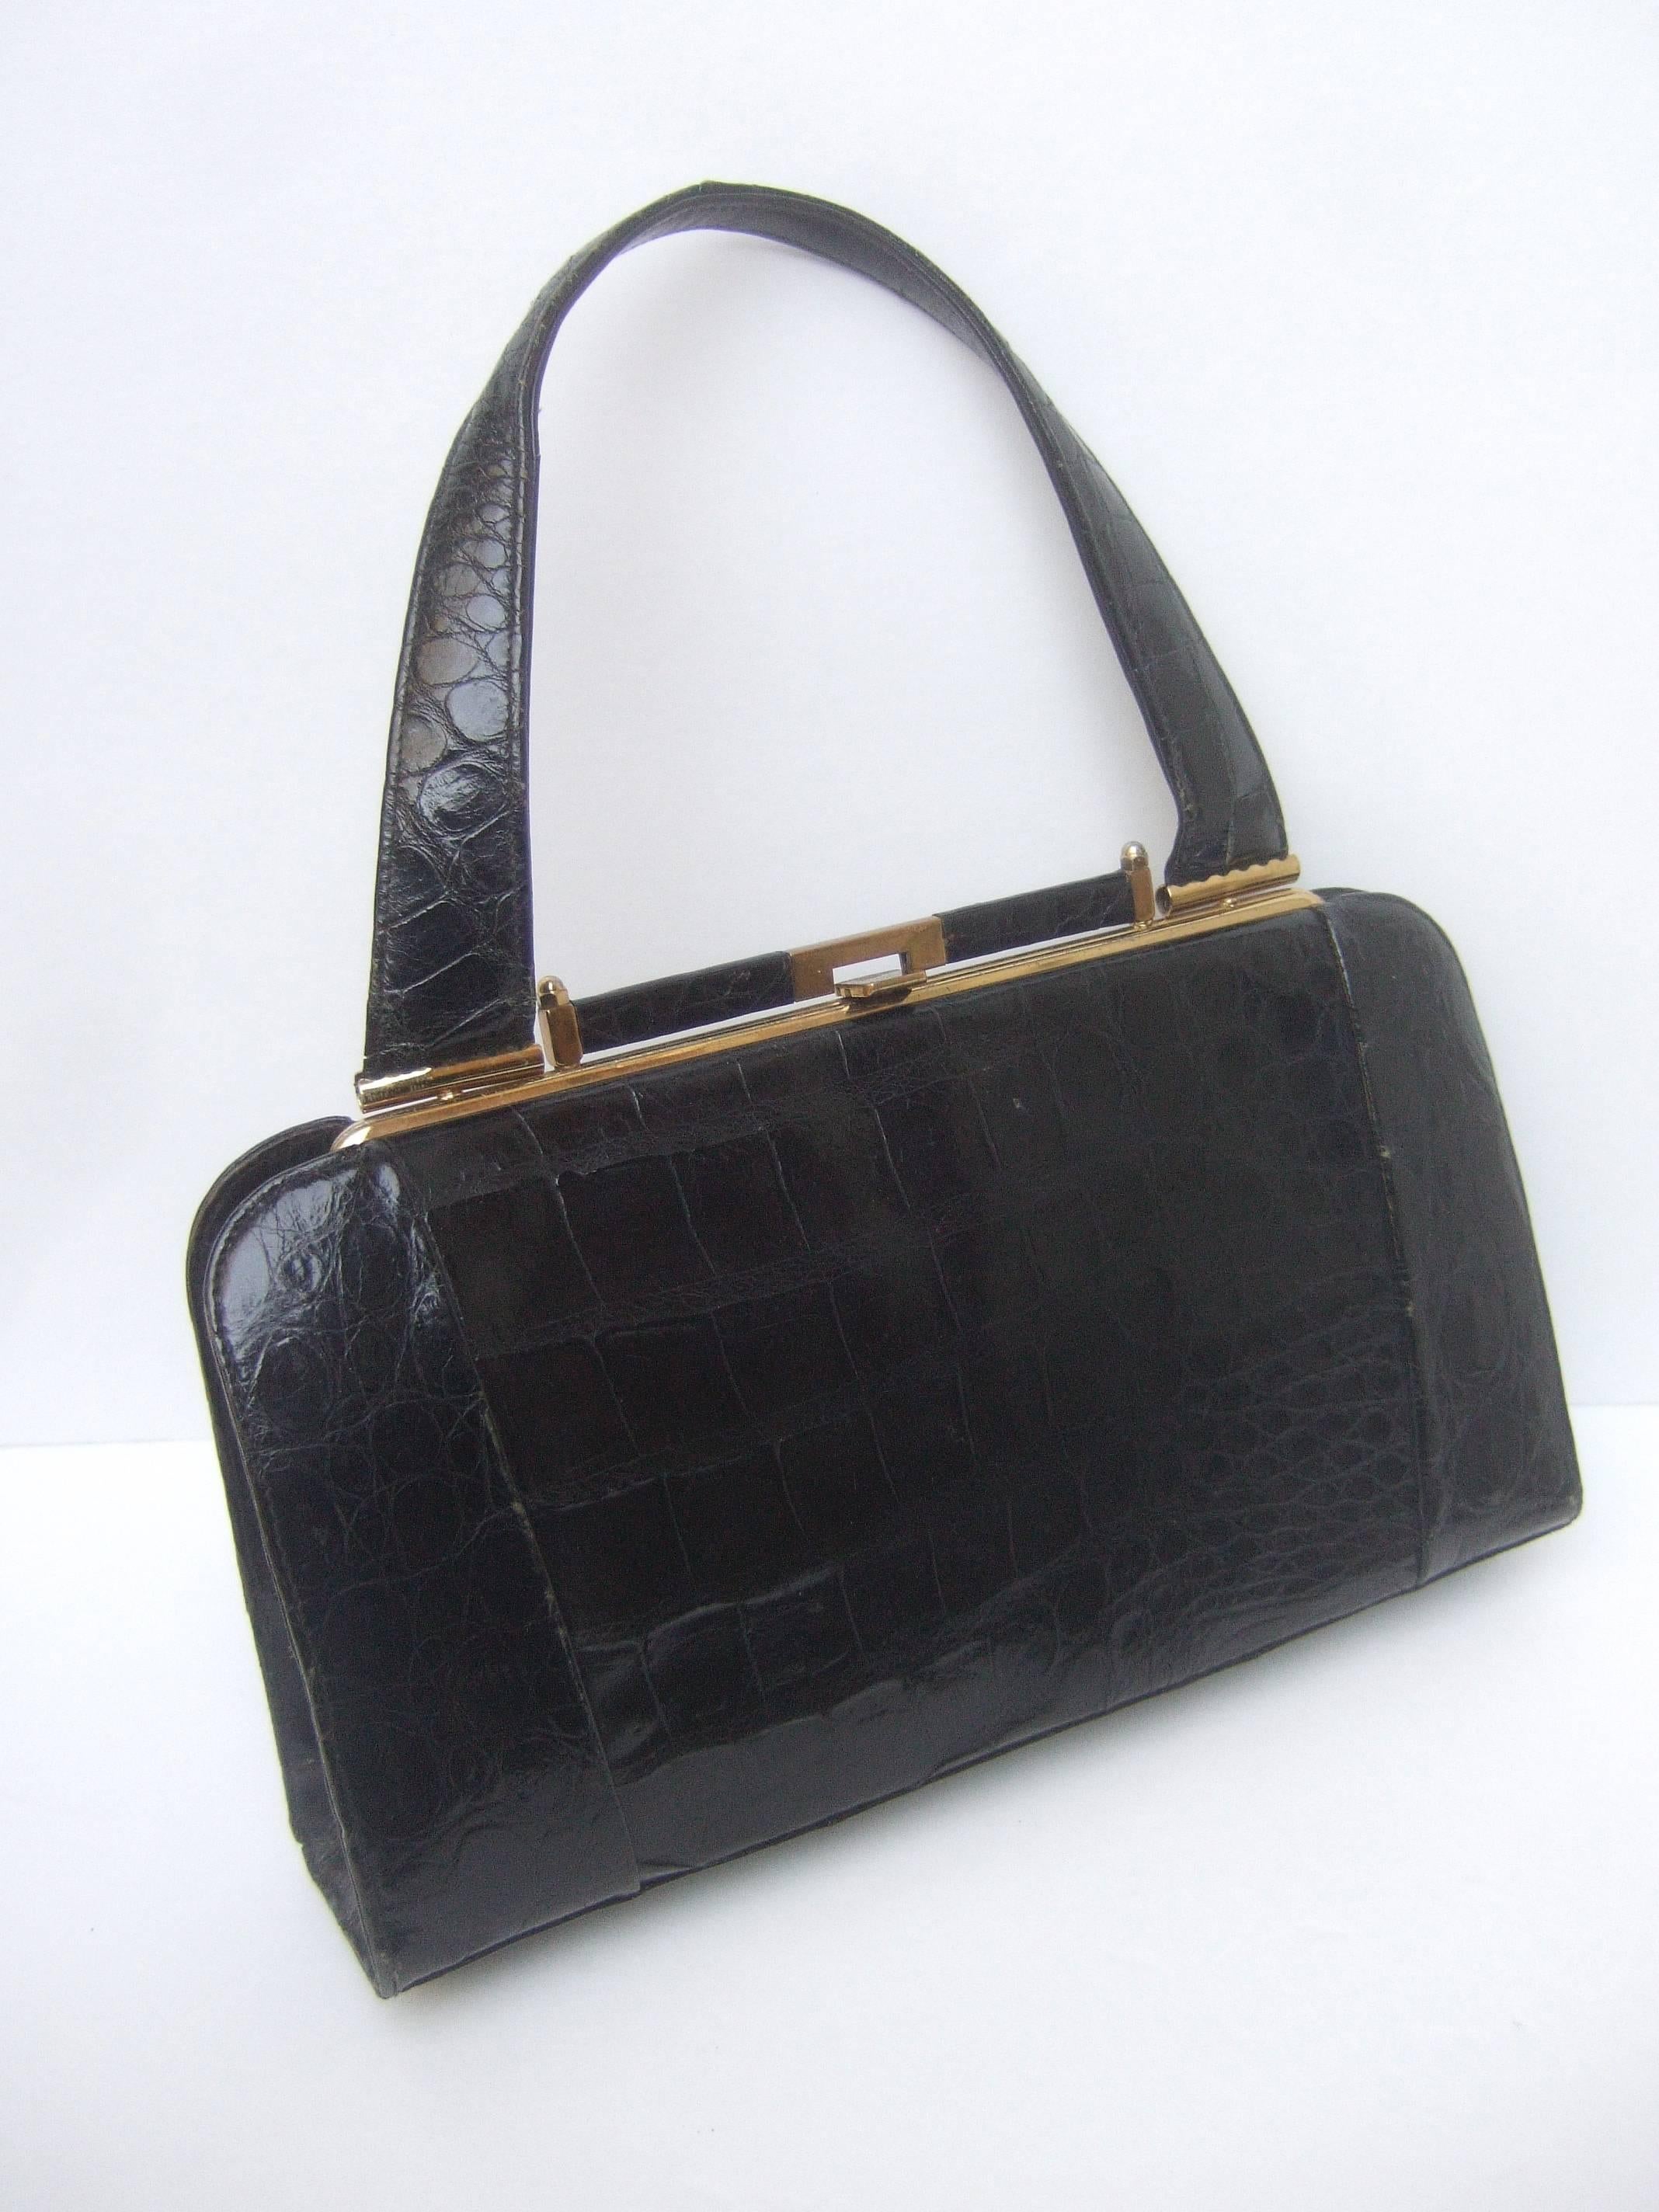 Sleek ebony vintage alligator leather handbag ca 1960s
The stylish retro handbag is covered with glossy black 
alligator skin

The handbag is designed with a sleek
gilt metal clasp frame and hardware
The interior is lined in ivory color